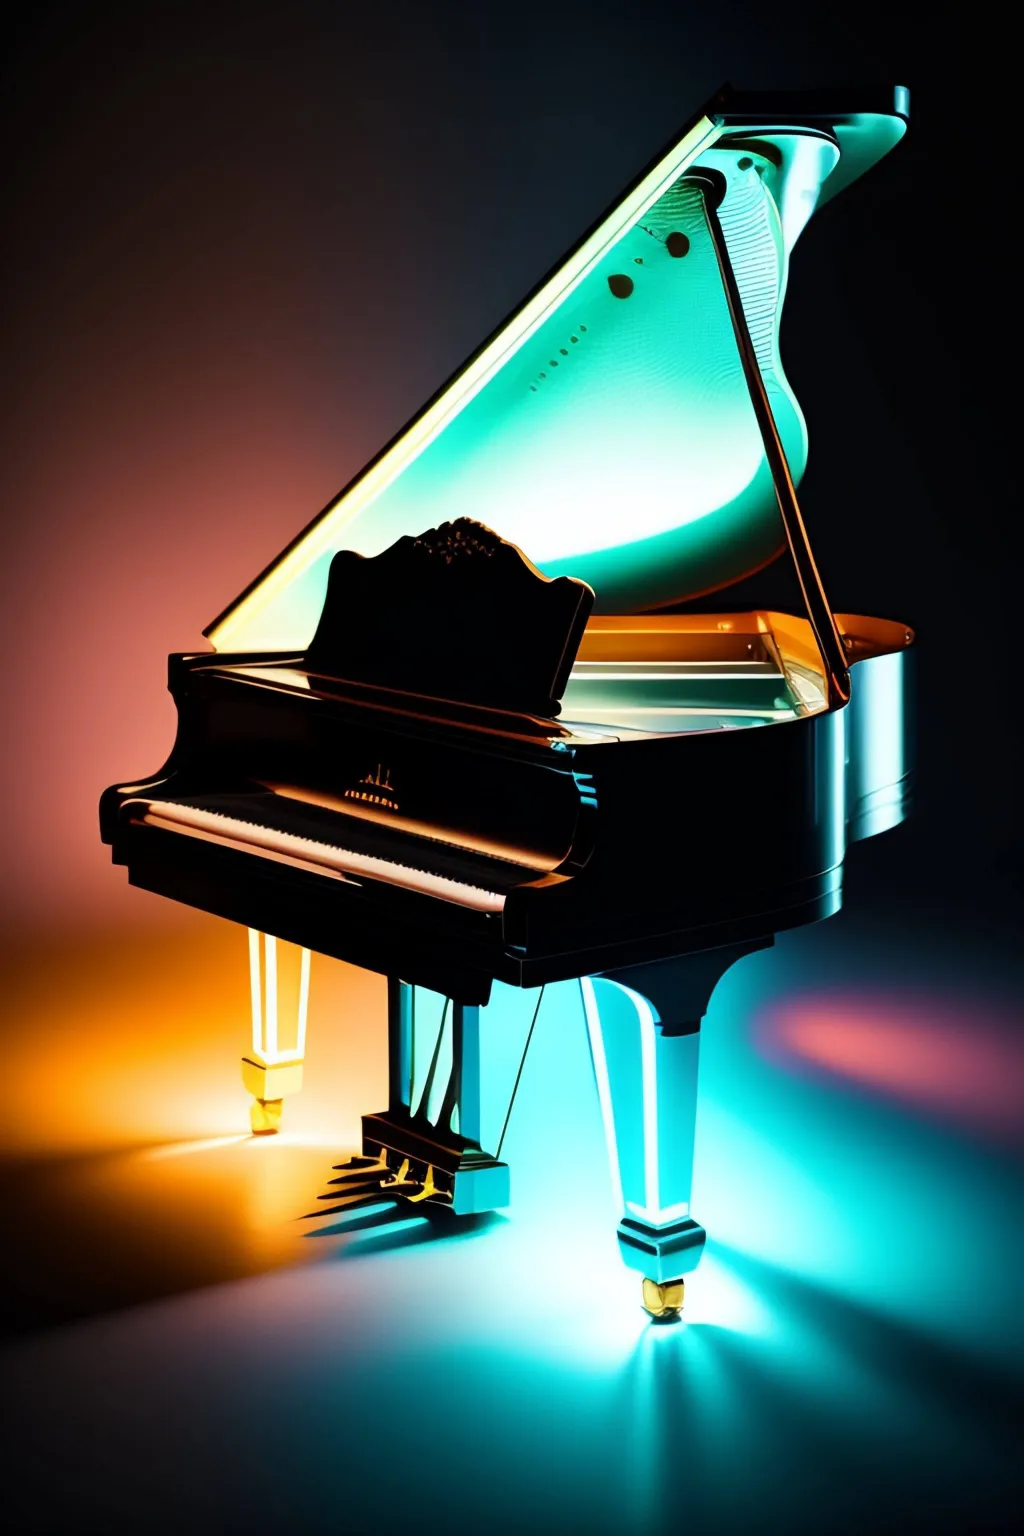 thumb for Piano Iphone 11 Wallpaper